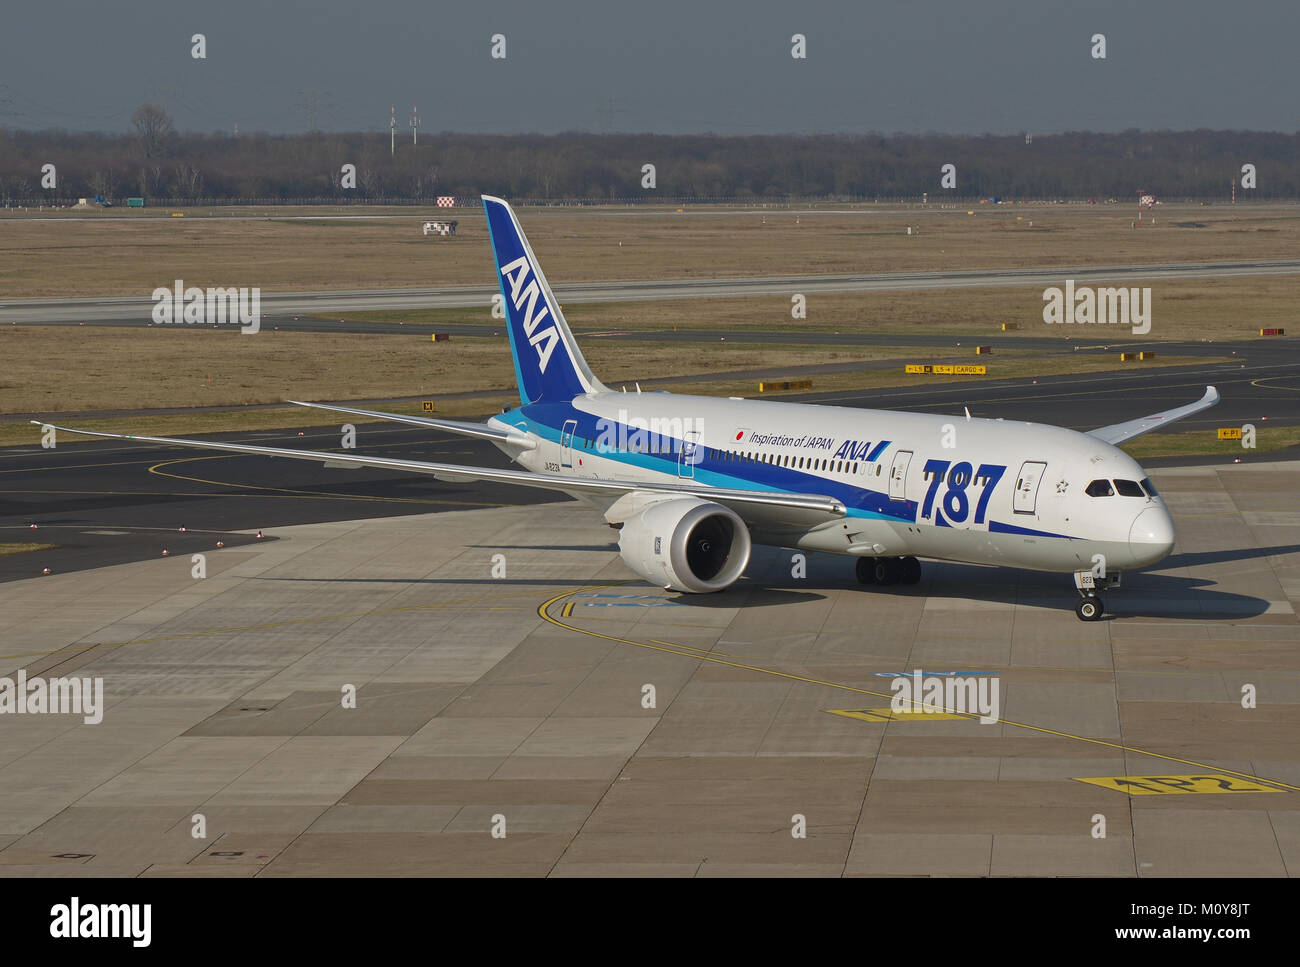 Duesseldorf, Germnany - MAarch 17, 2015: Boeing 787-8 of All Nippon Airways (ANA) at the airport of Duesseldorf while taxiing Stock Photo